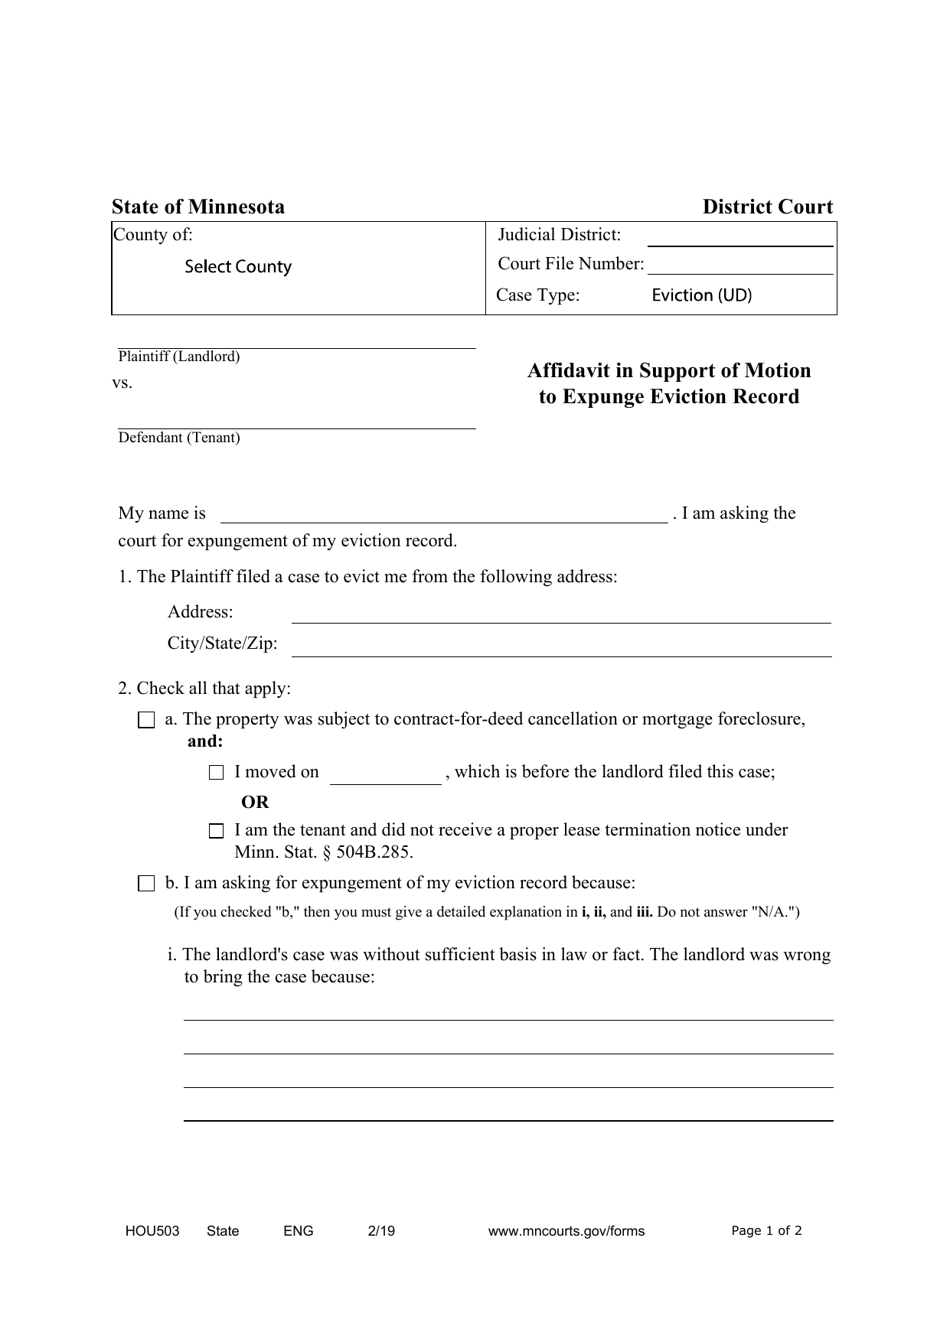 Form HOU503 Affidavit in Support of Motion for Expungement of Eviction Record - Minnesota, Page 1